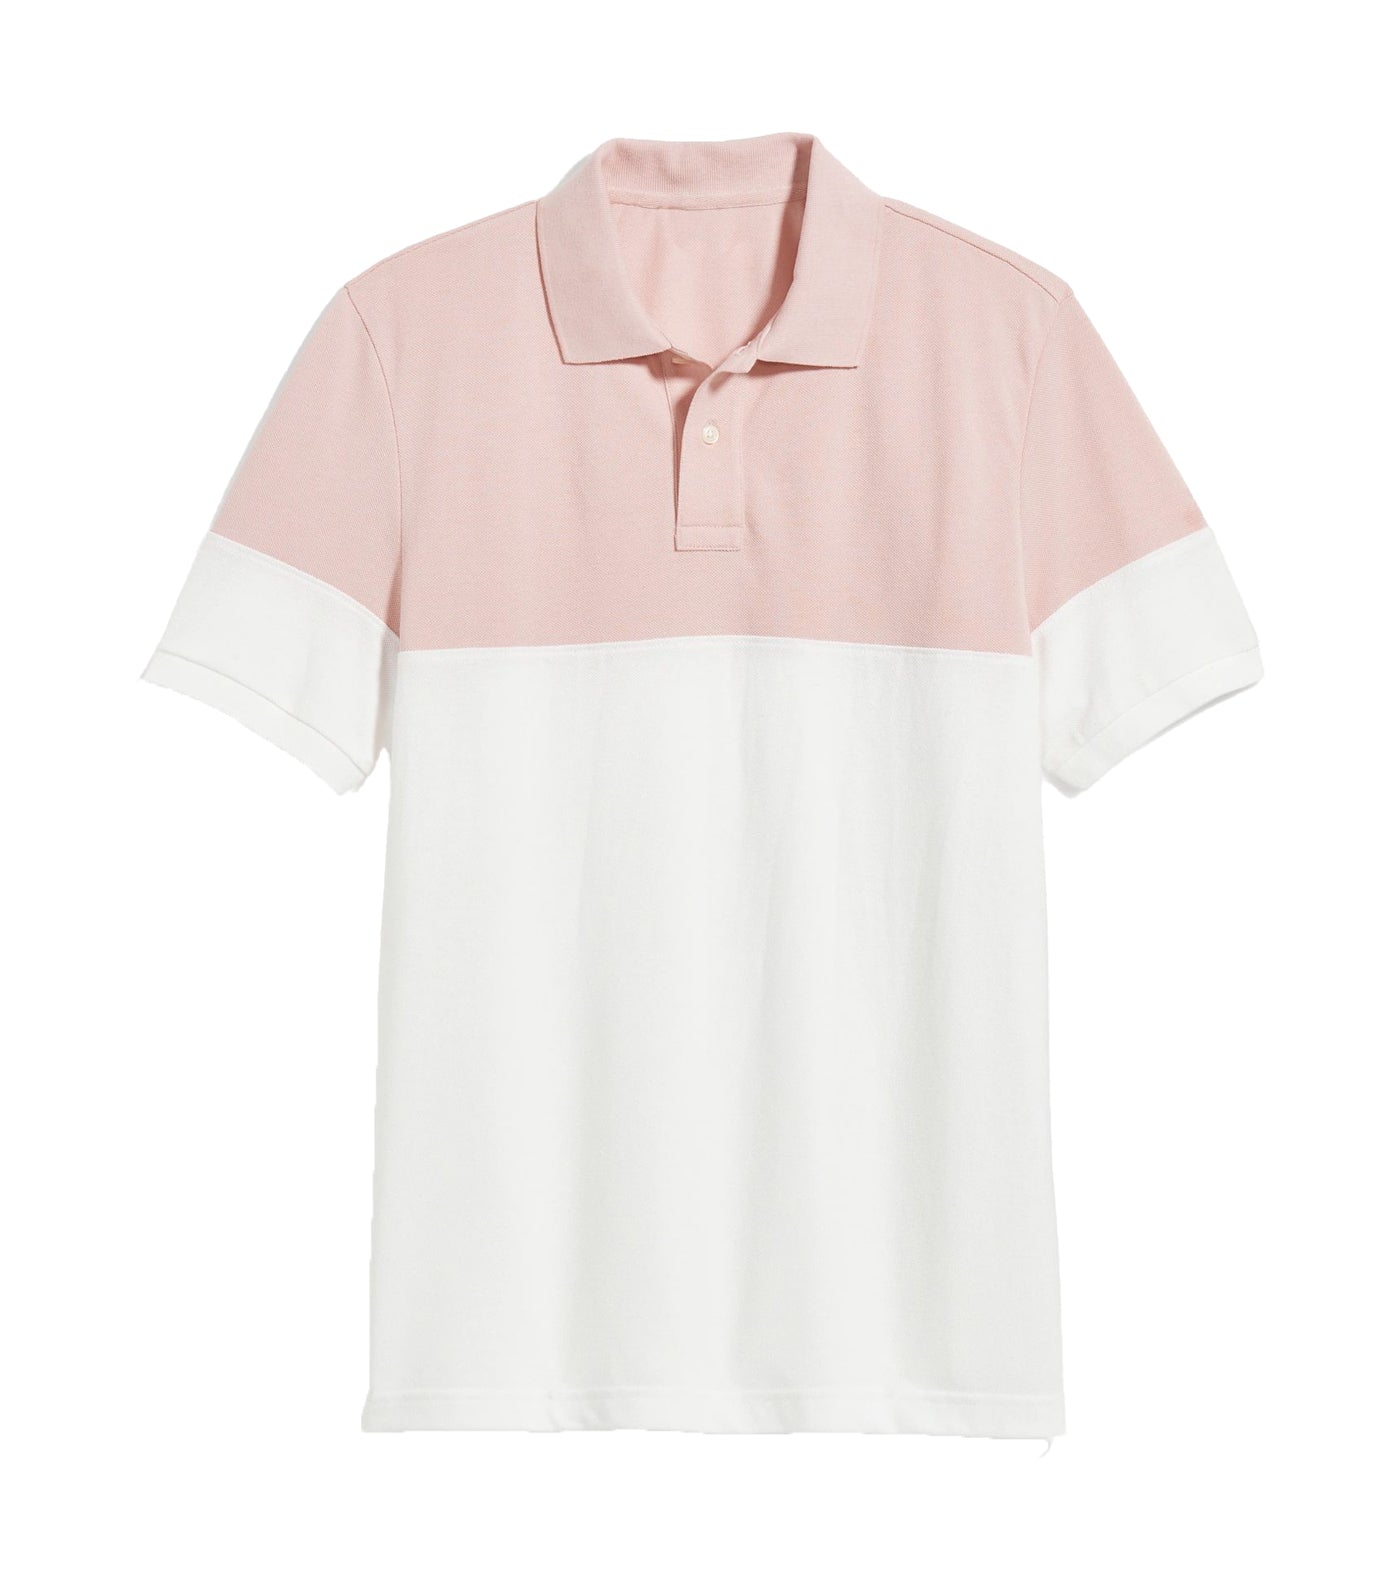 Color-Block Classic Fit Pique Polo for Men Pink and White